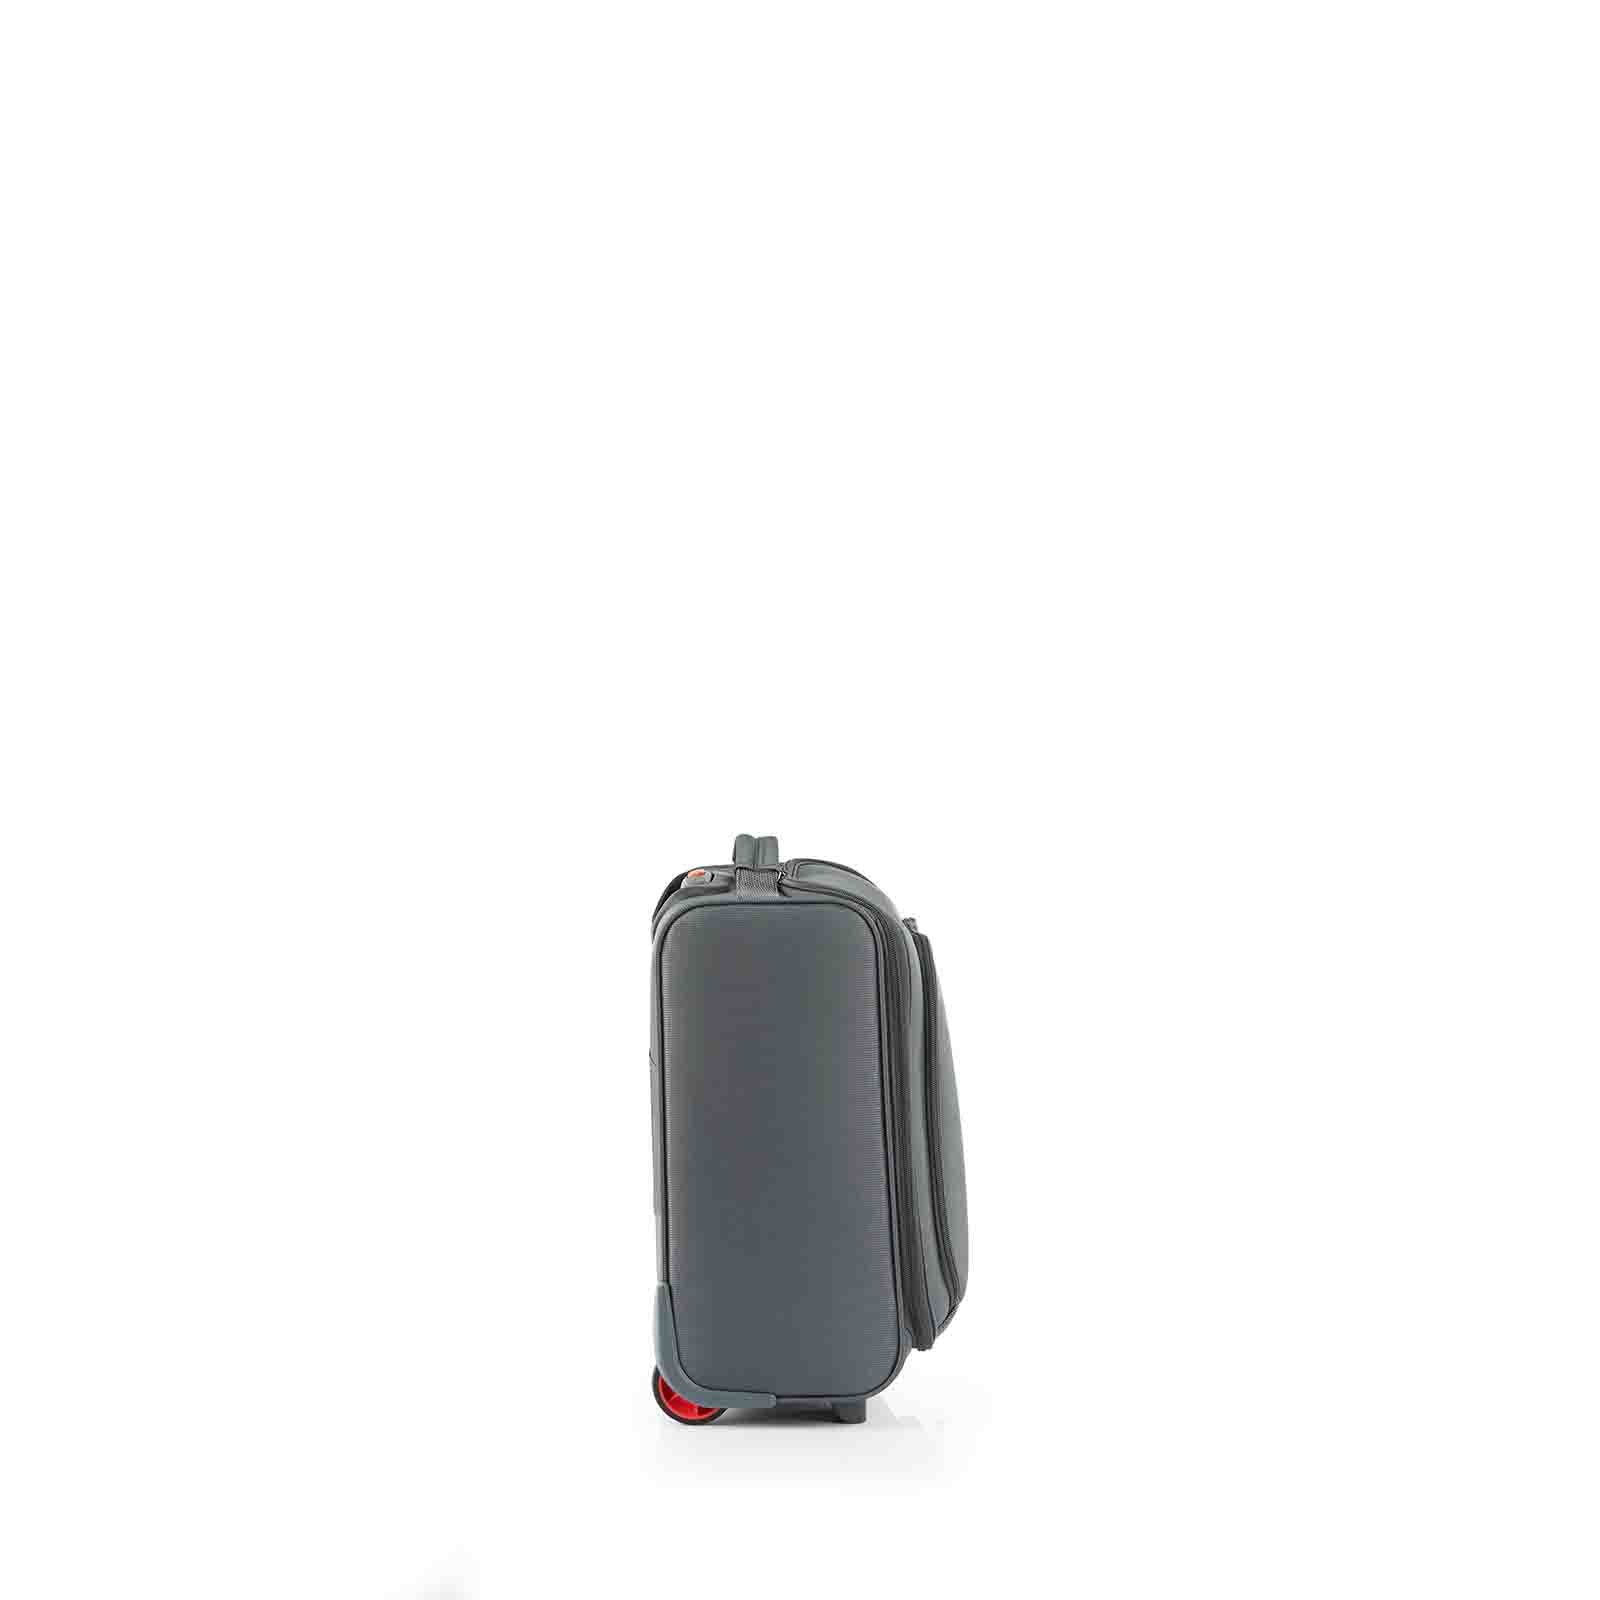 American-Tourister-Applite-4-Eco-Underseater-Suitcase-Grey-Red-Side-LH